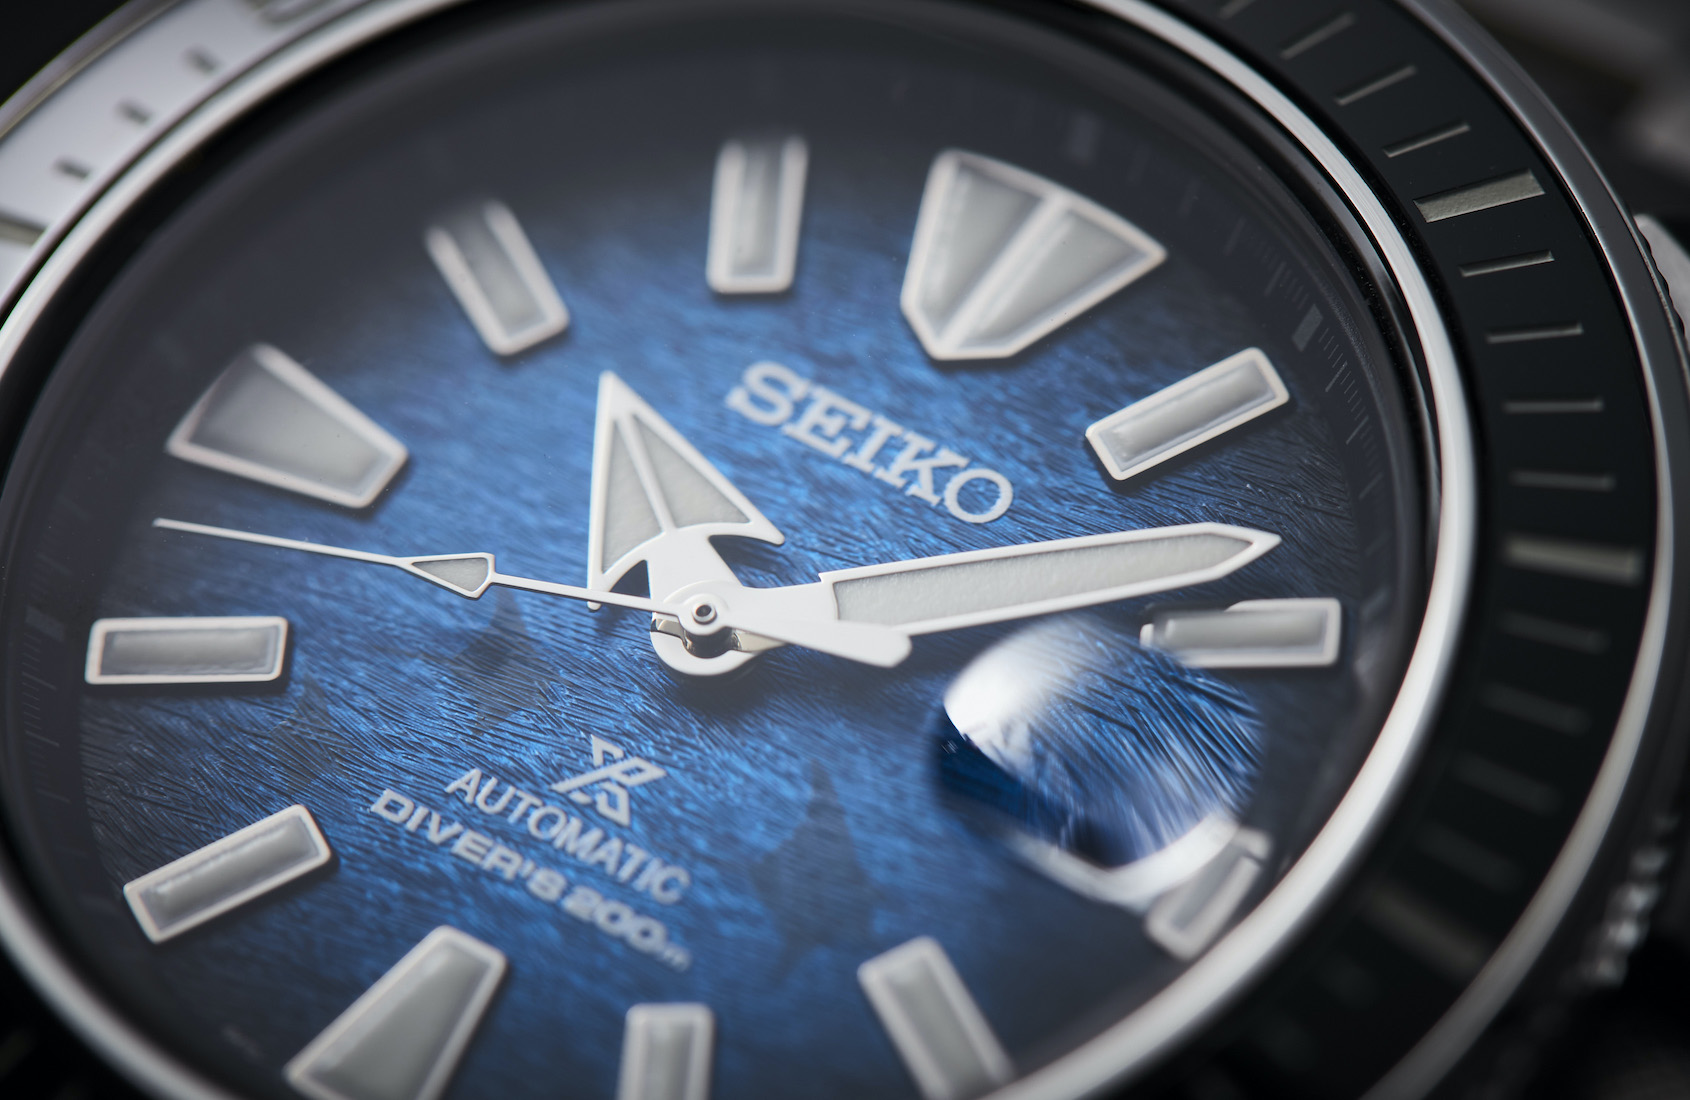 INTRODUCING: the SEIKO Prospex Save the Oceans SRPE33K